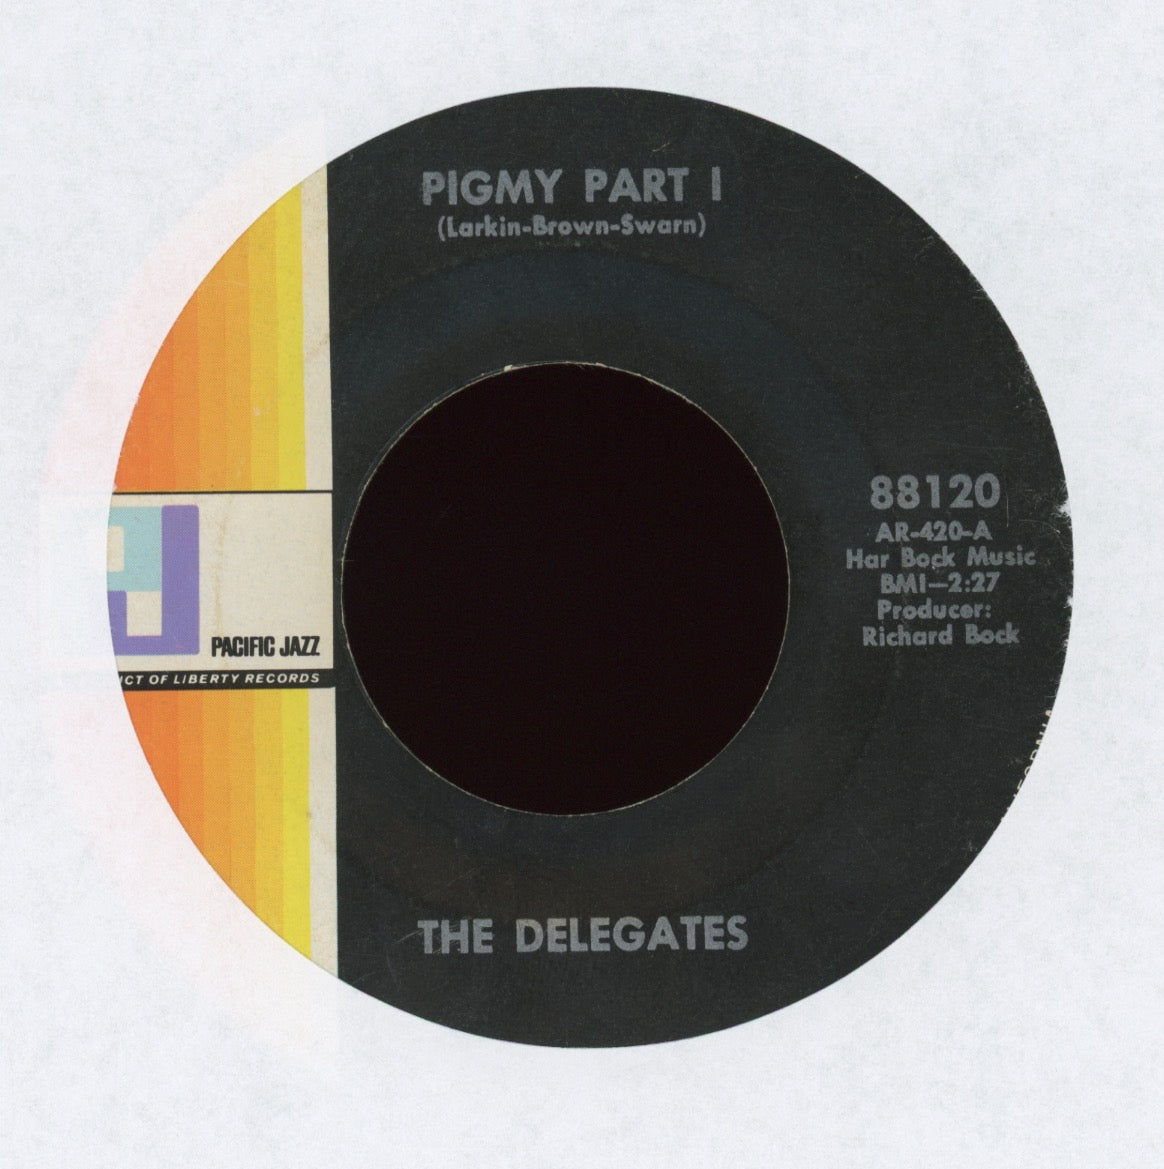 Billy Larkin And The Delegates - Pigmy Part I on Pacific Jazz